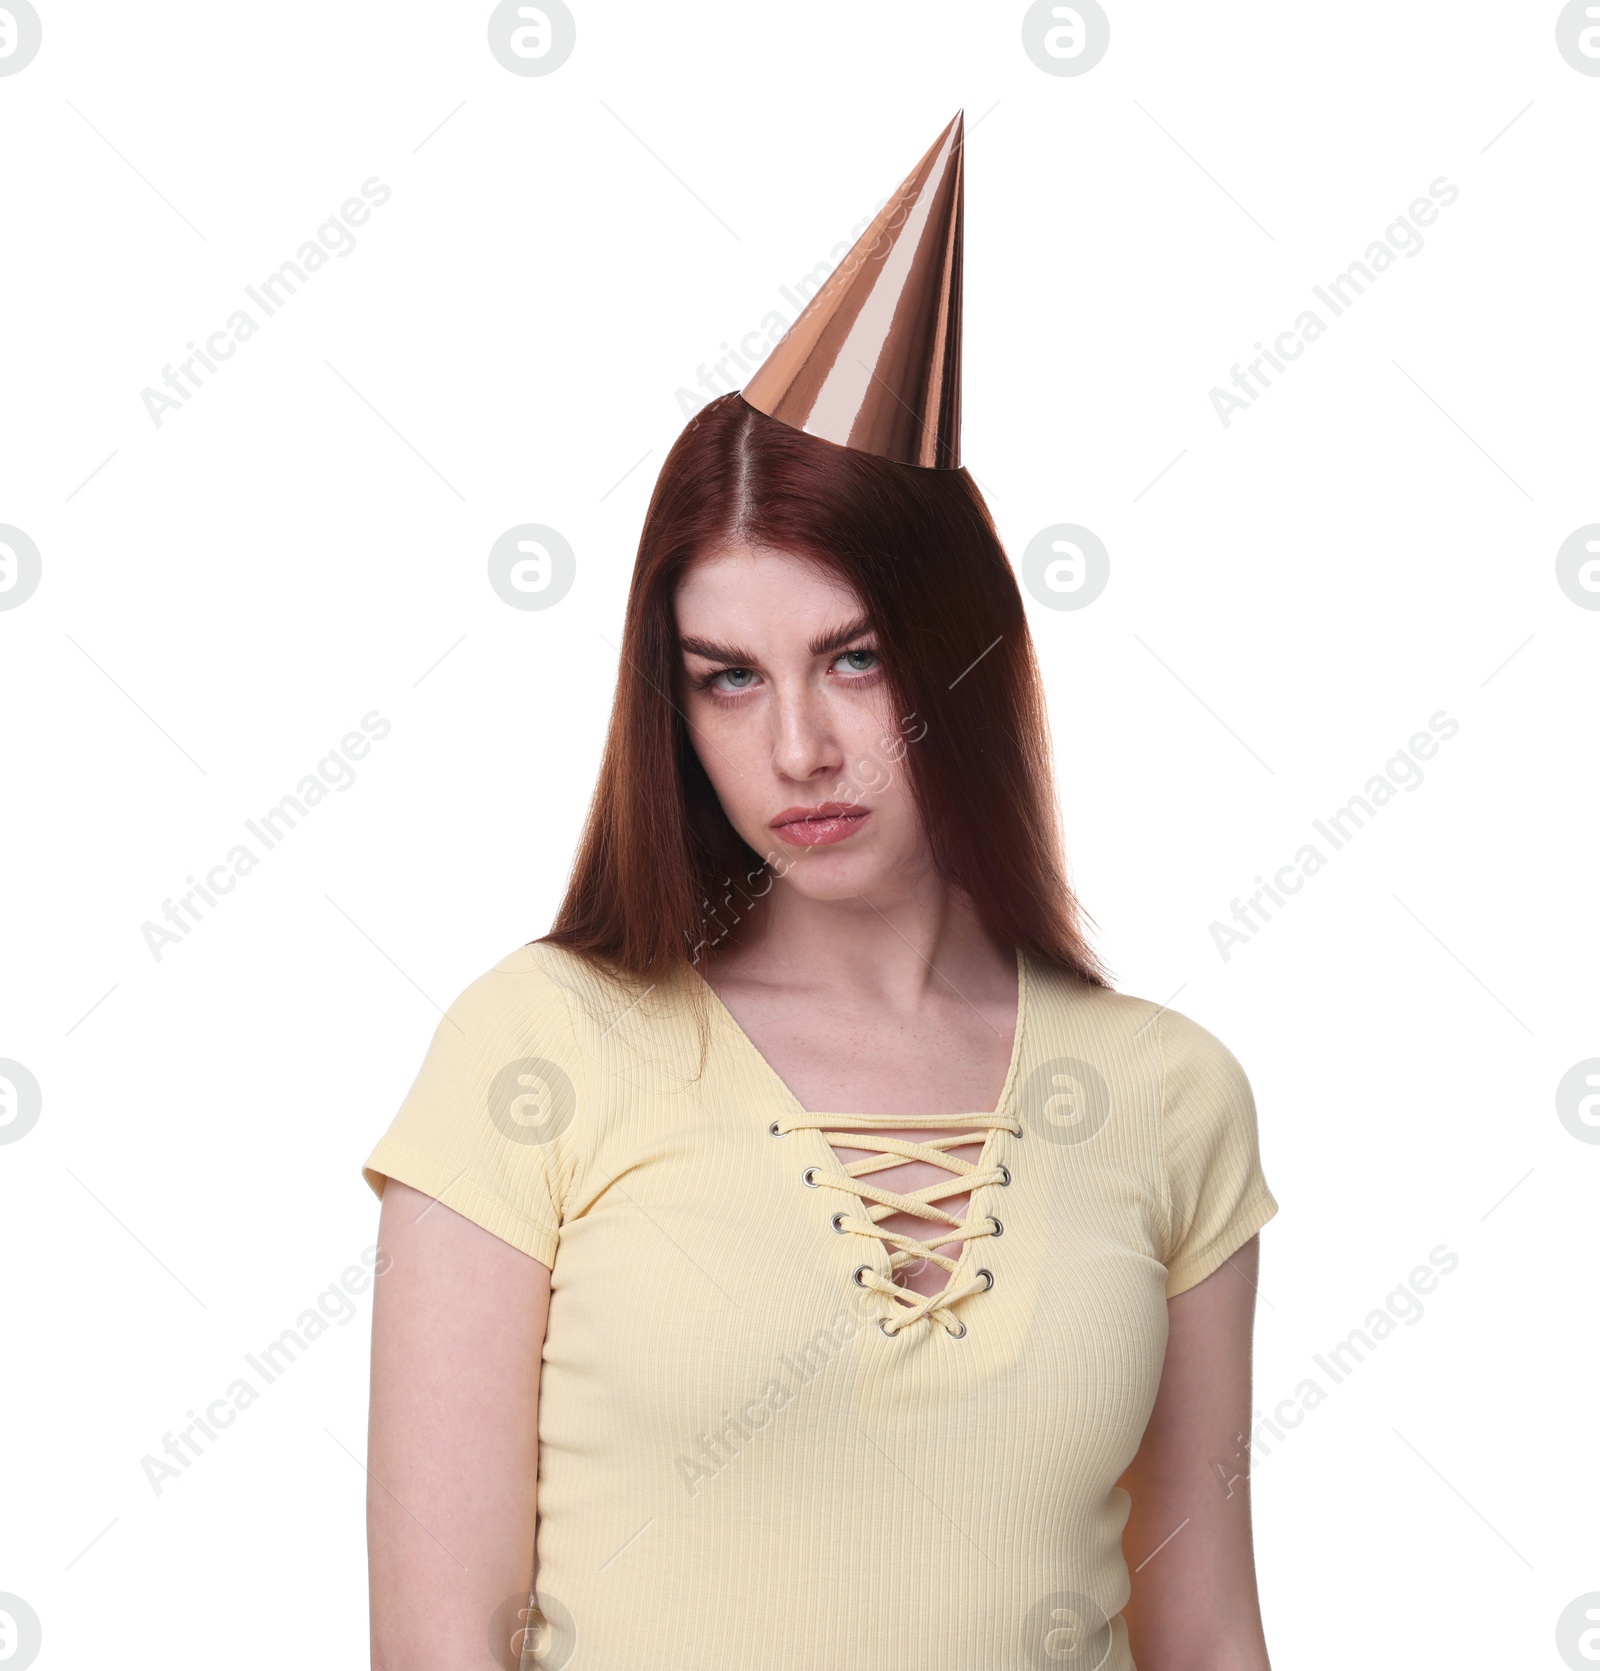 Photo of Sad woman in party hat on white background